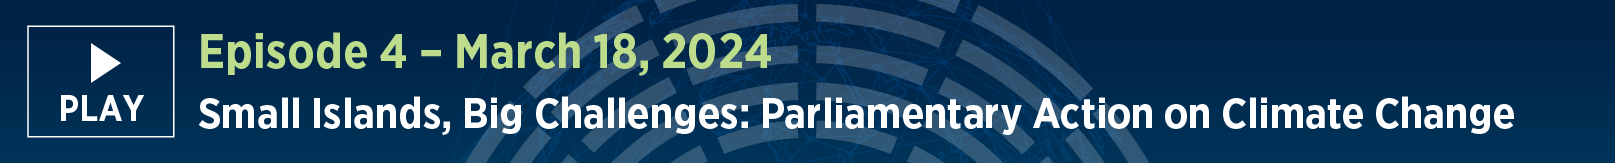 Episode 4: March 26, 2024 - Small Islands, Big Challenges: Parliamentary Action on Climate Change